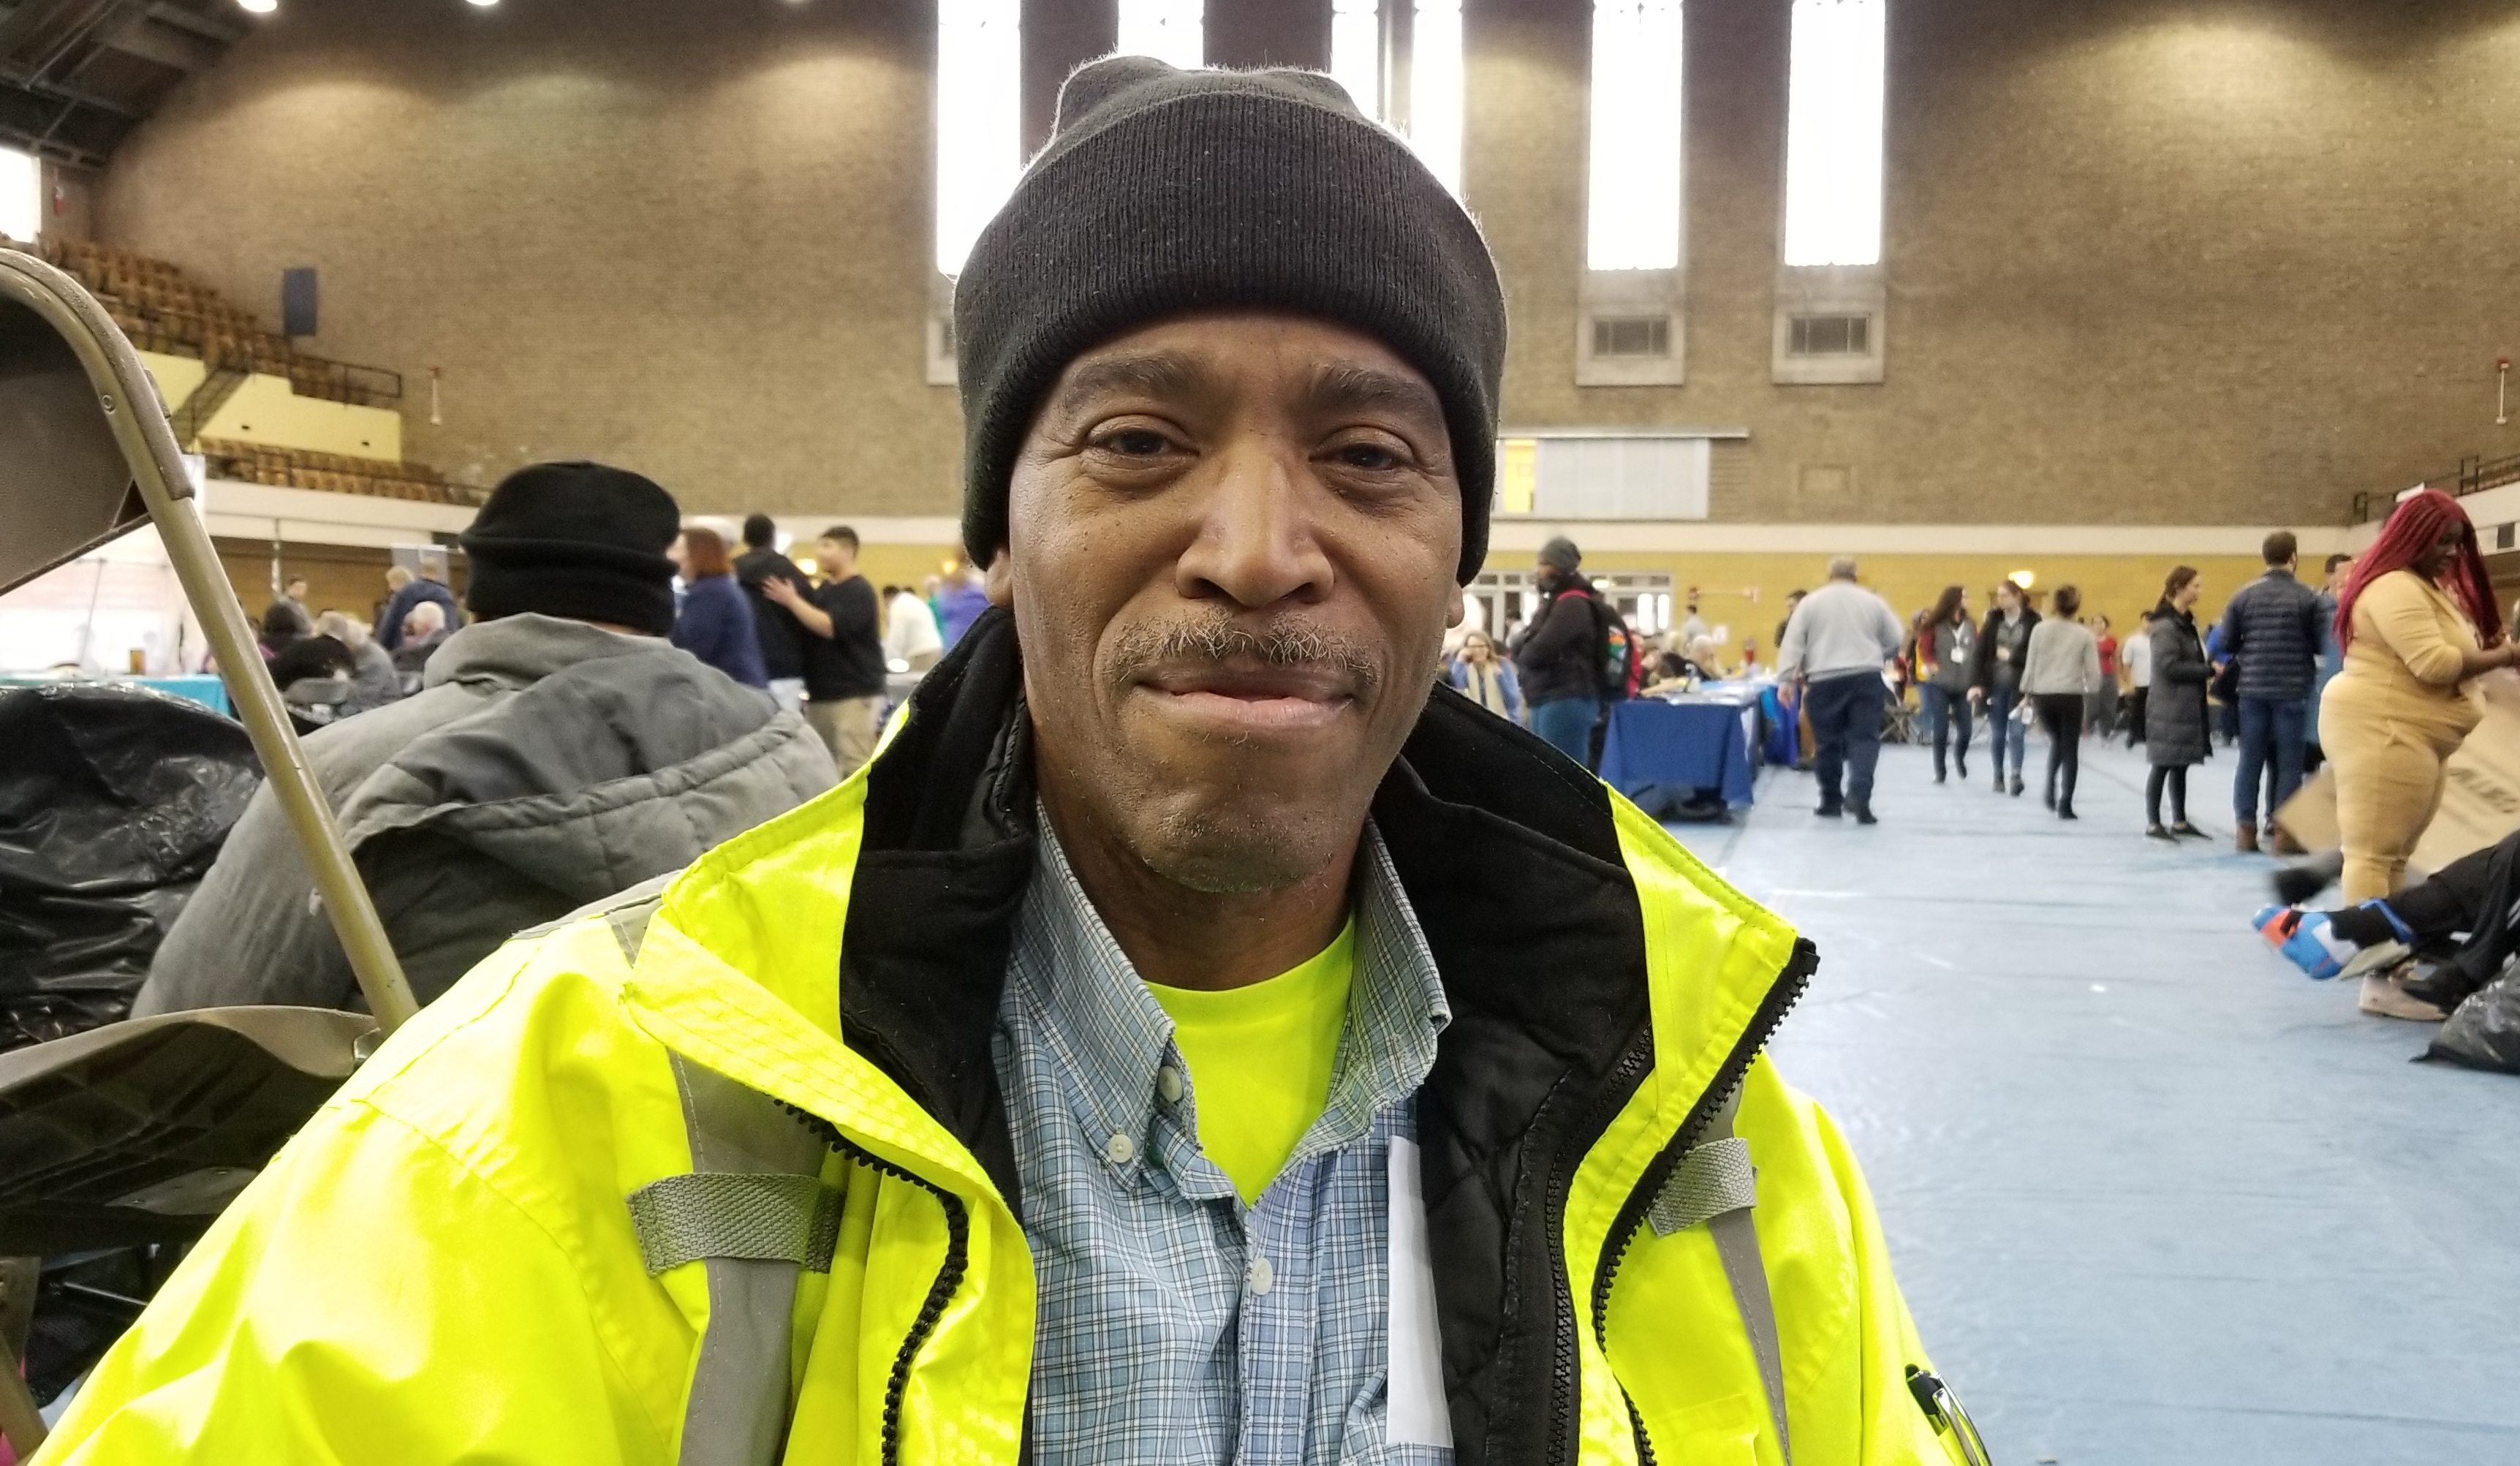 Army veteran Norman Hall poses for a photo at the Chicago Standdown. Hall turned to community support services, including his neighborhood pantries, after a car accident left him unable to work.